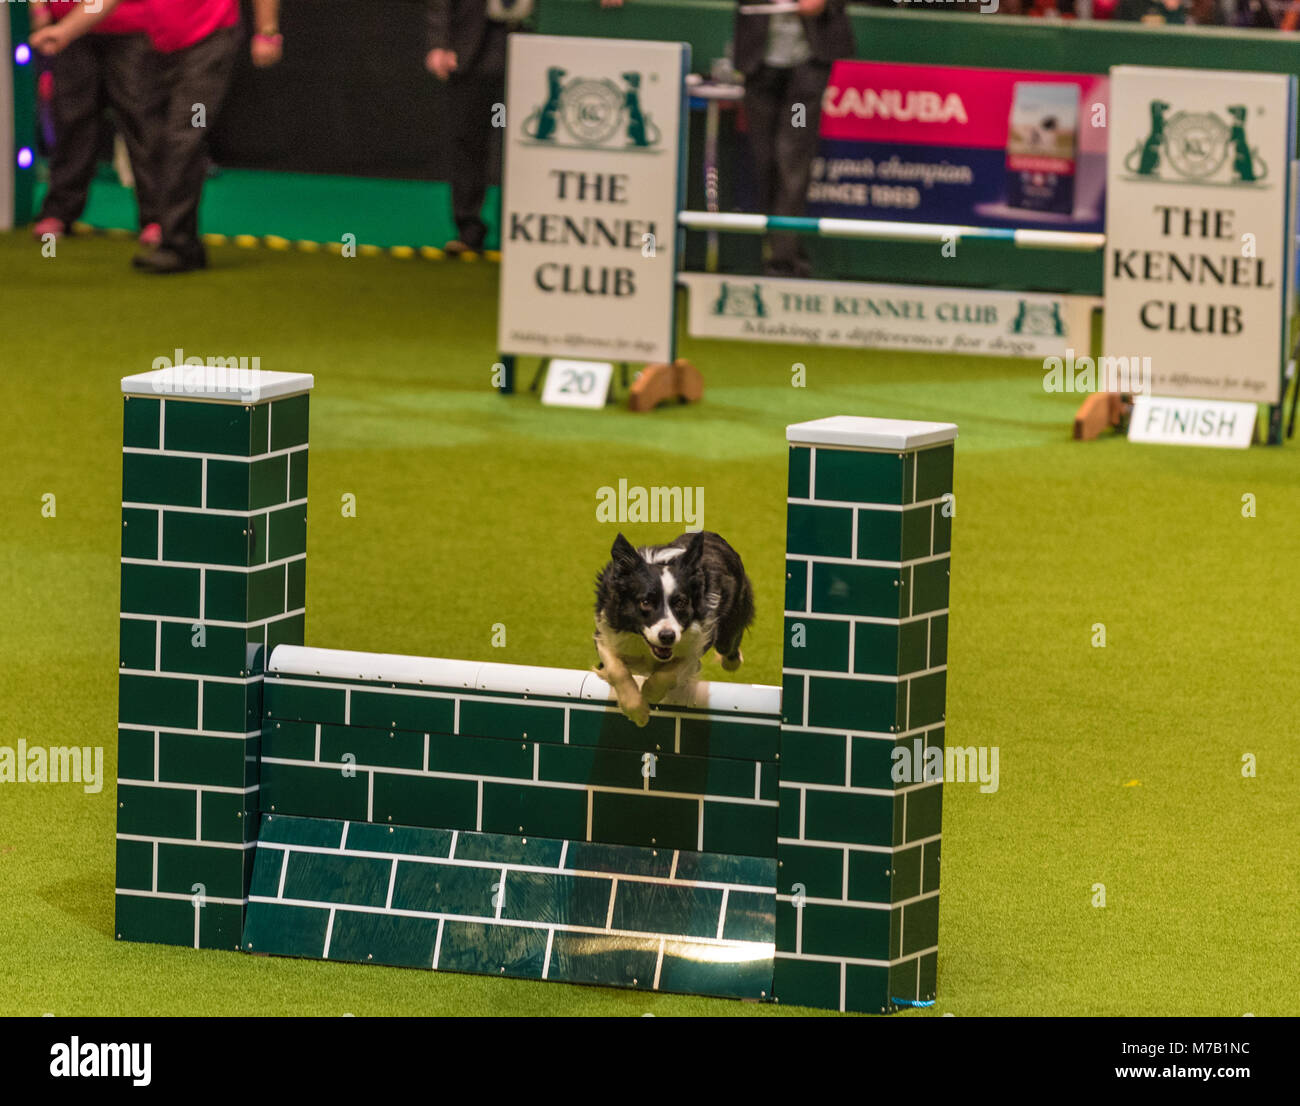 Birmingham, UK. 9th Mar, 2018. Crufts Dog Show Birmingham Uk. agility dogs competition in the main arena at this year's Crufts Dog Show at Birminghams  NEC. Credit: charlie bryan/Alamy Live News Stock Photo